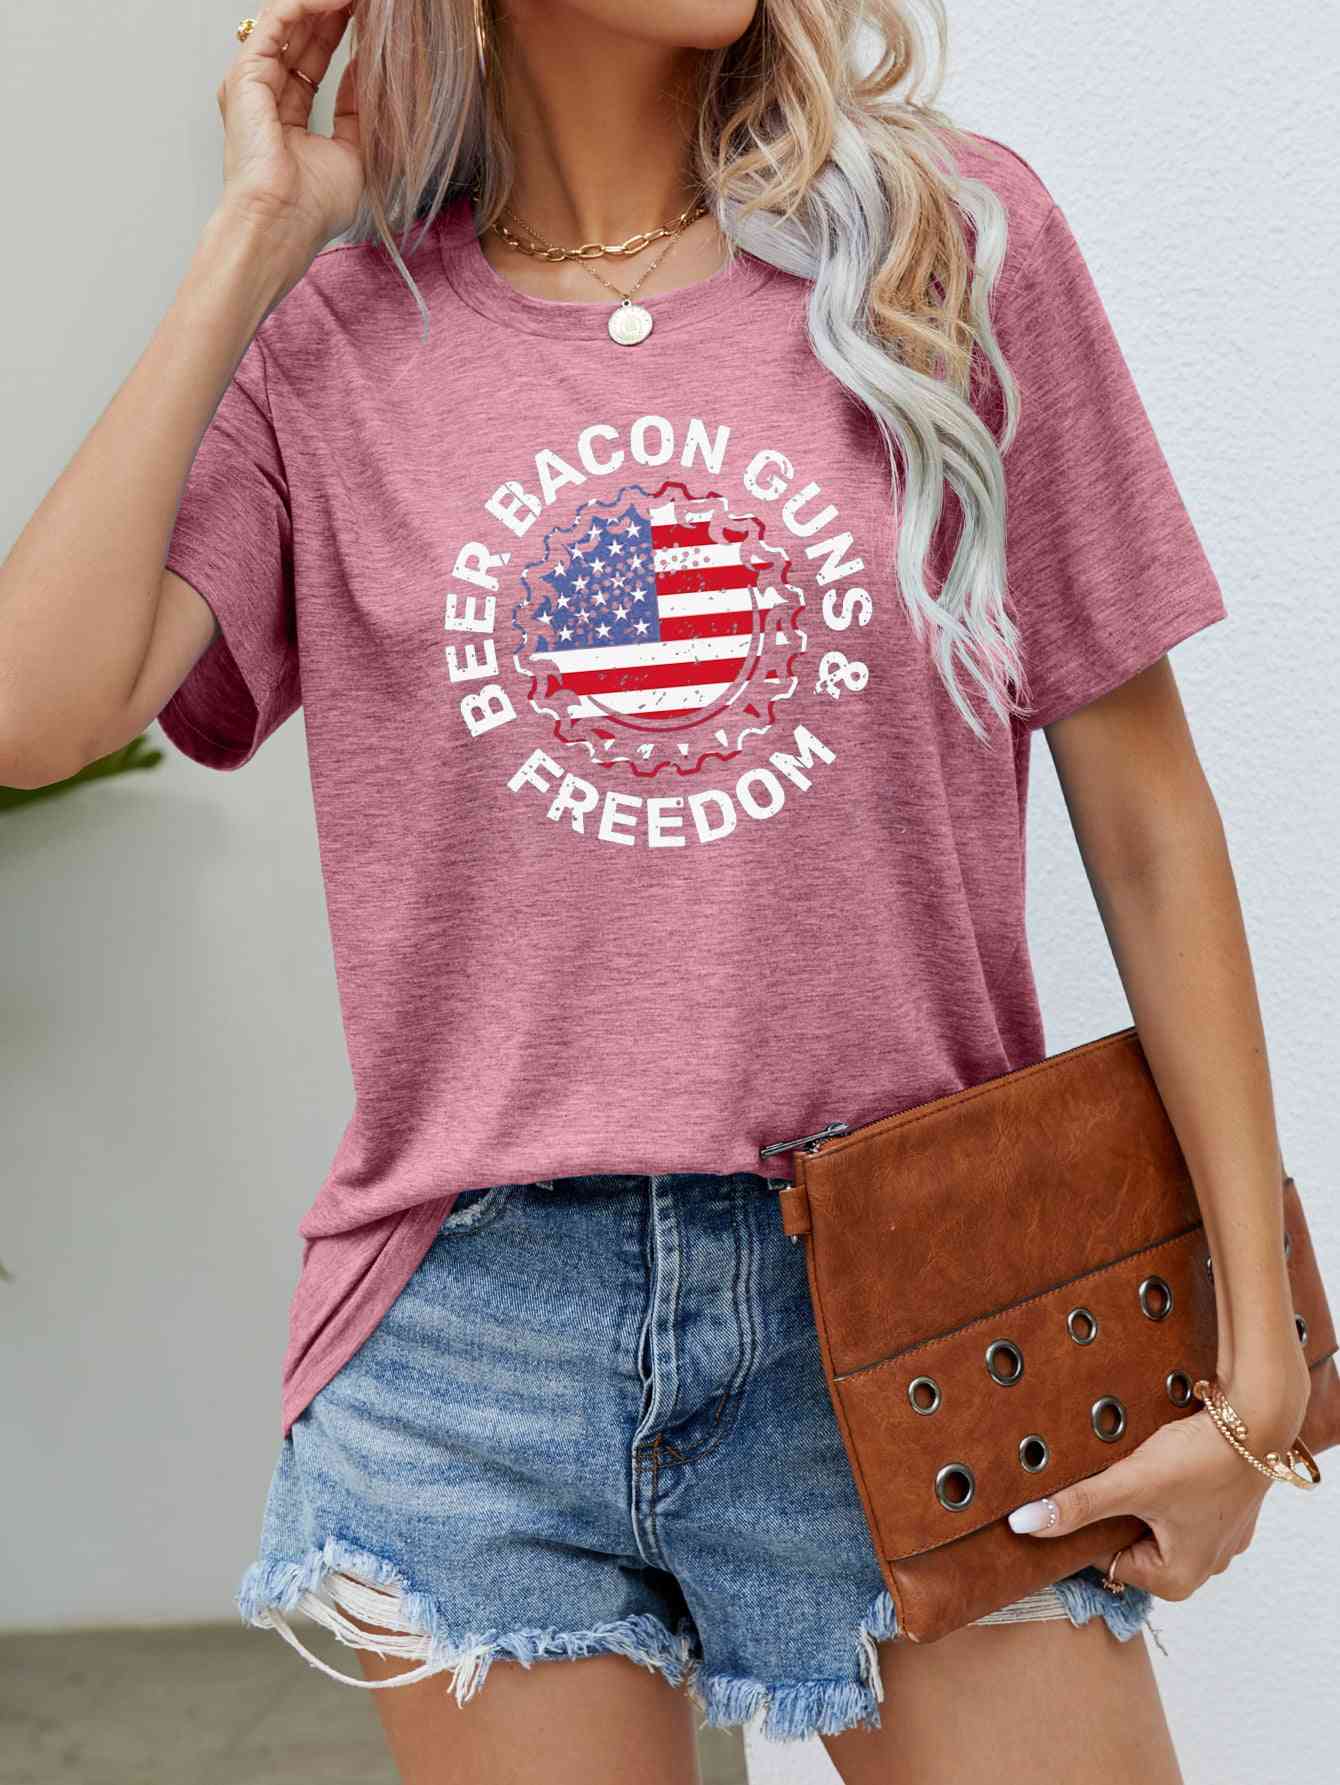 BEER BACON GUNS & FREEDOM US Flag Graphic Tee Dusty Pink S 